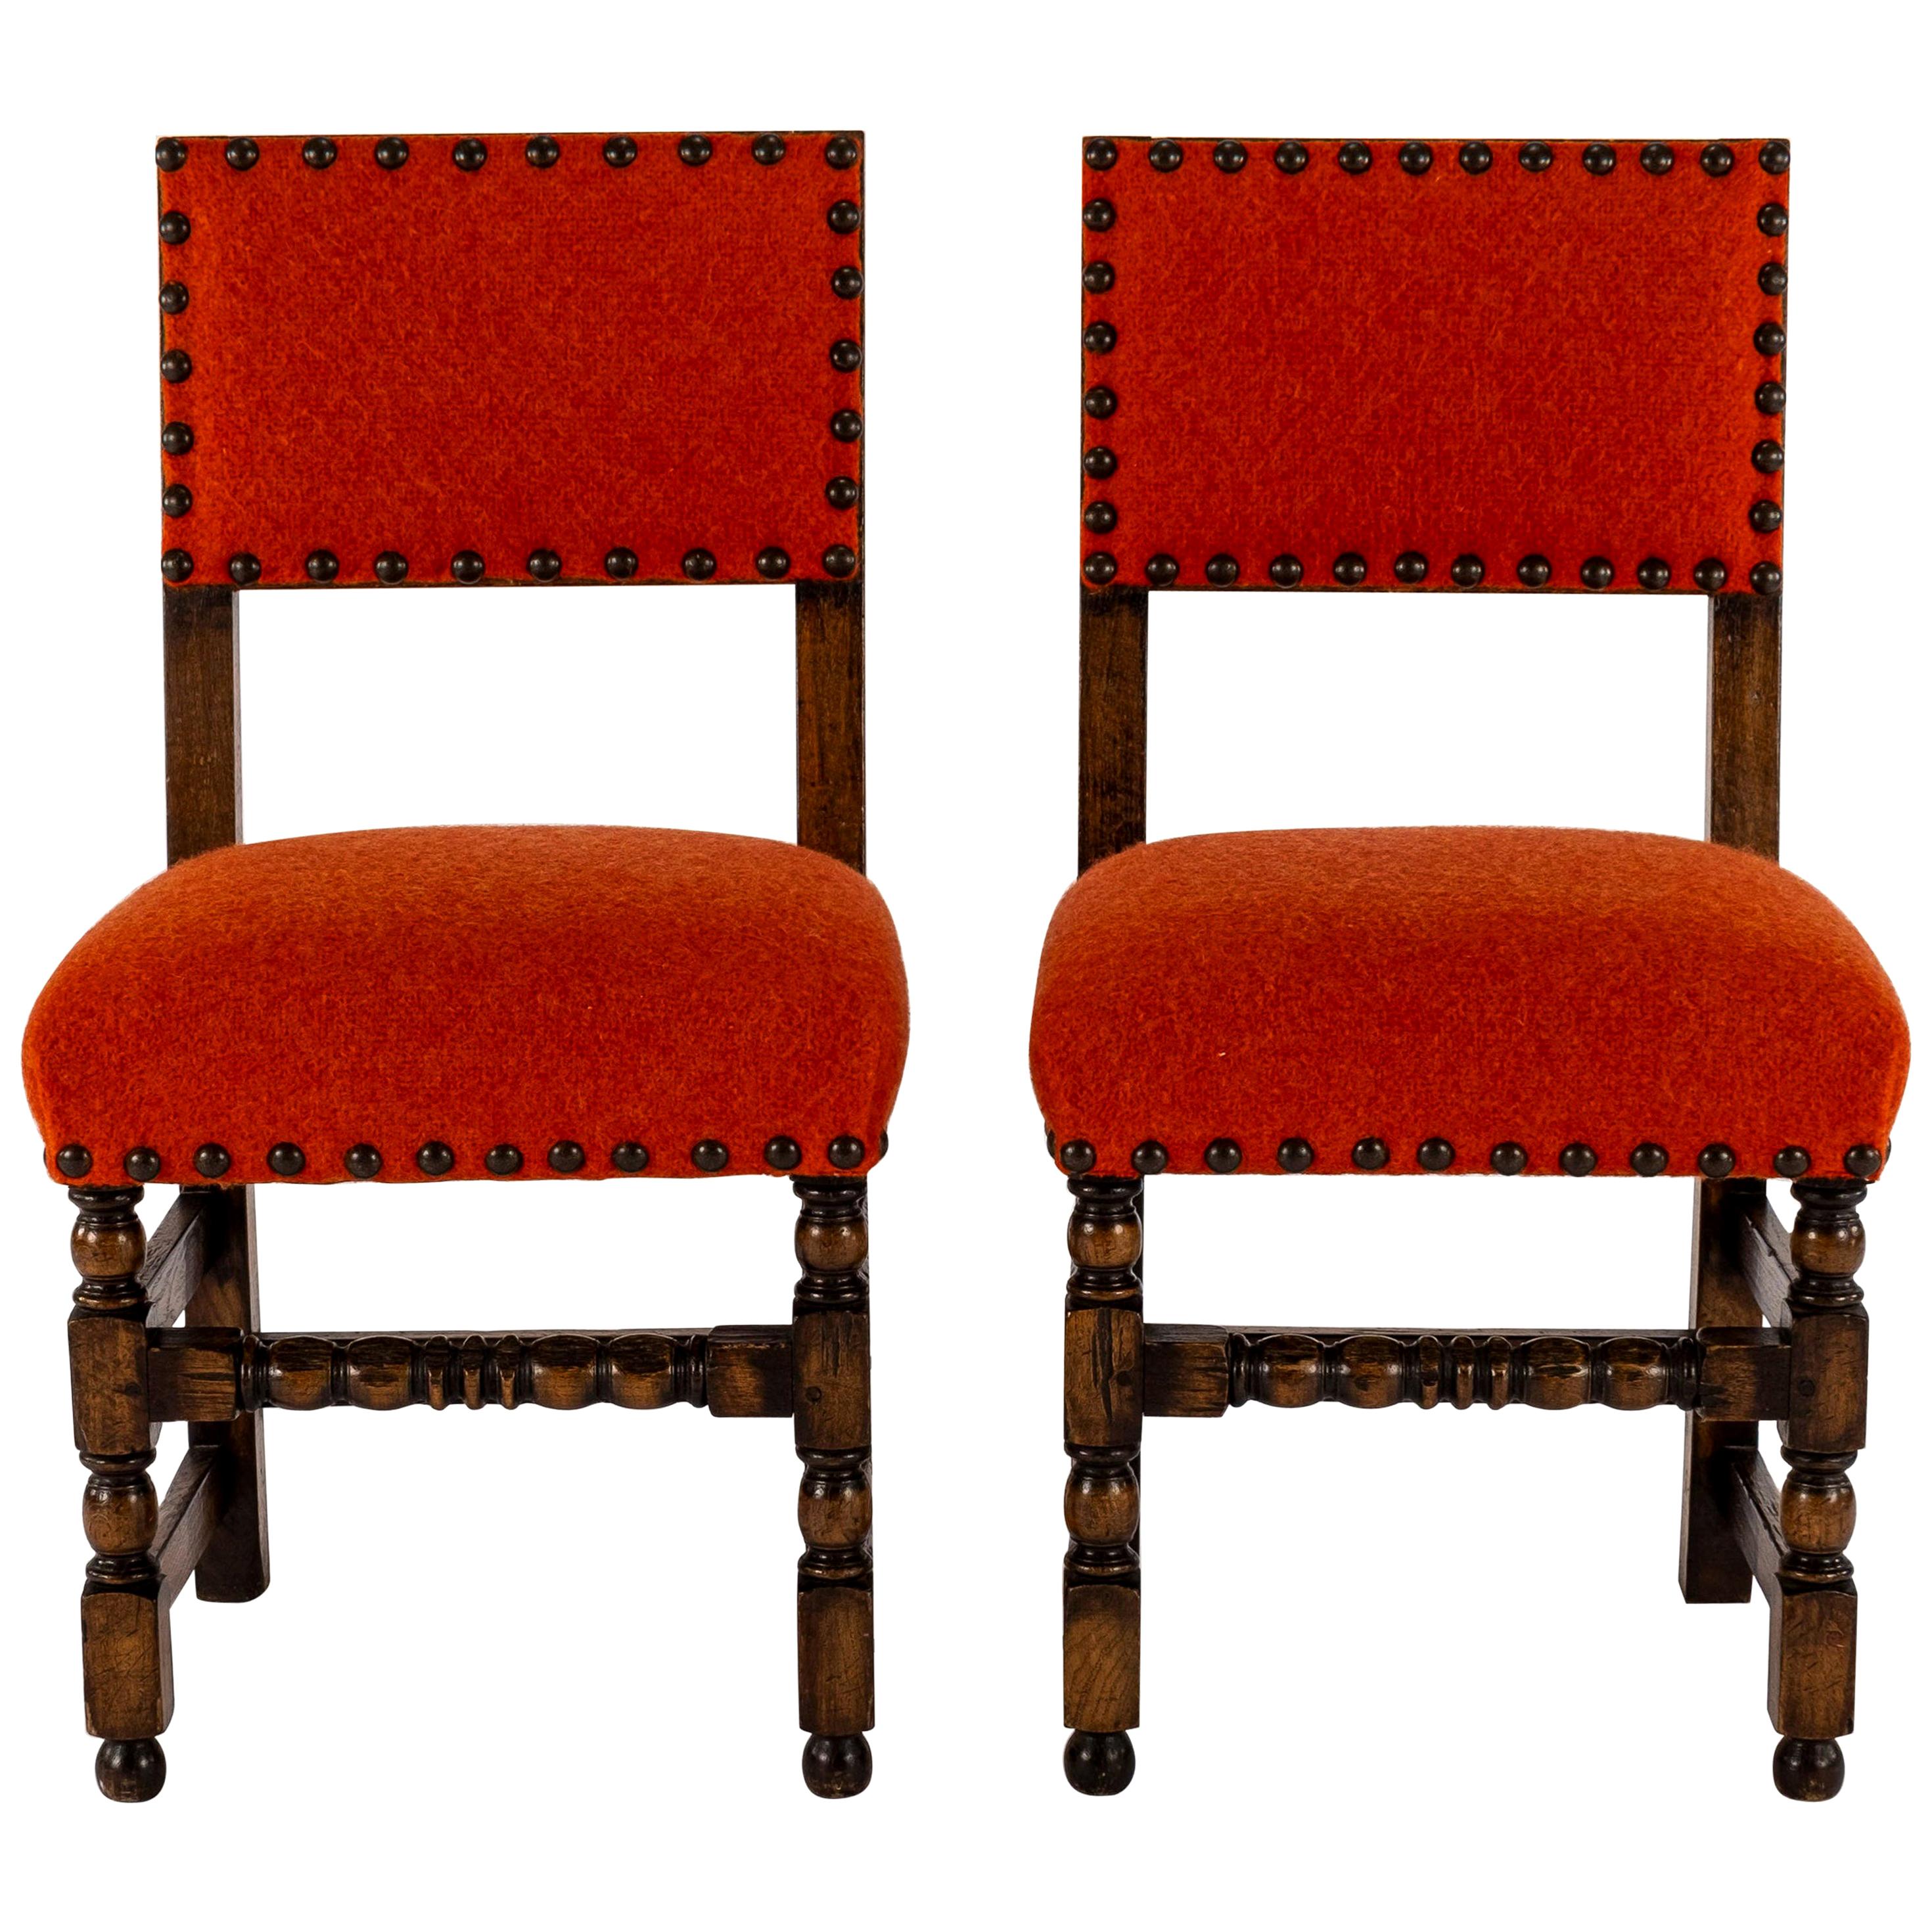 Pair of 19th Century Orange Red Louis XIII Style Walnut Chairs